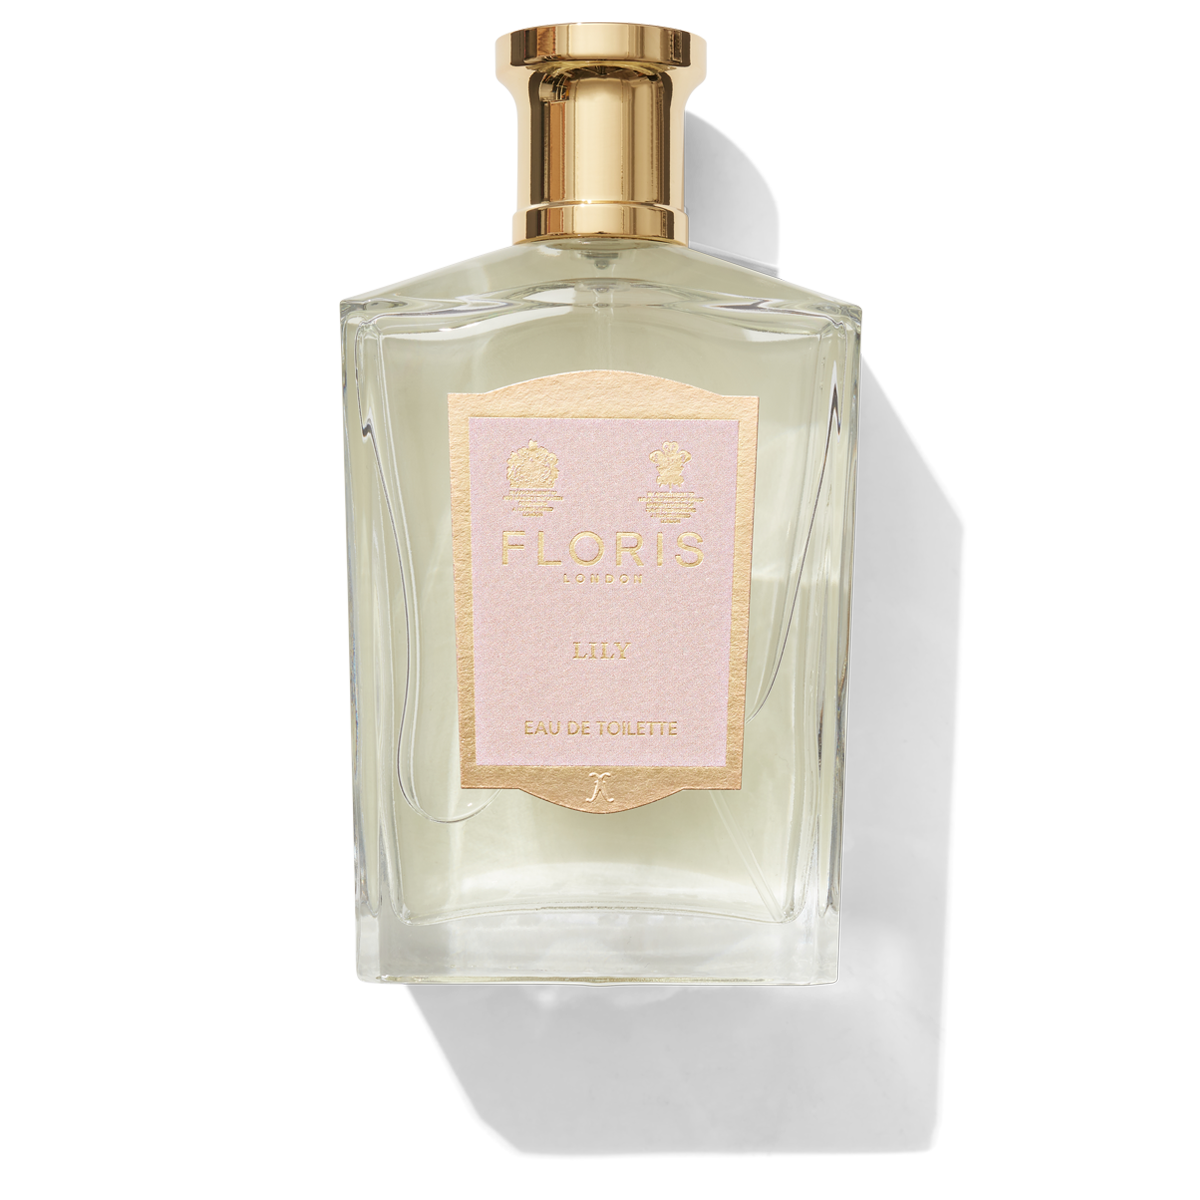 Lily Eau de Toilette in glass bottle with light pink and gold label 